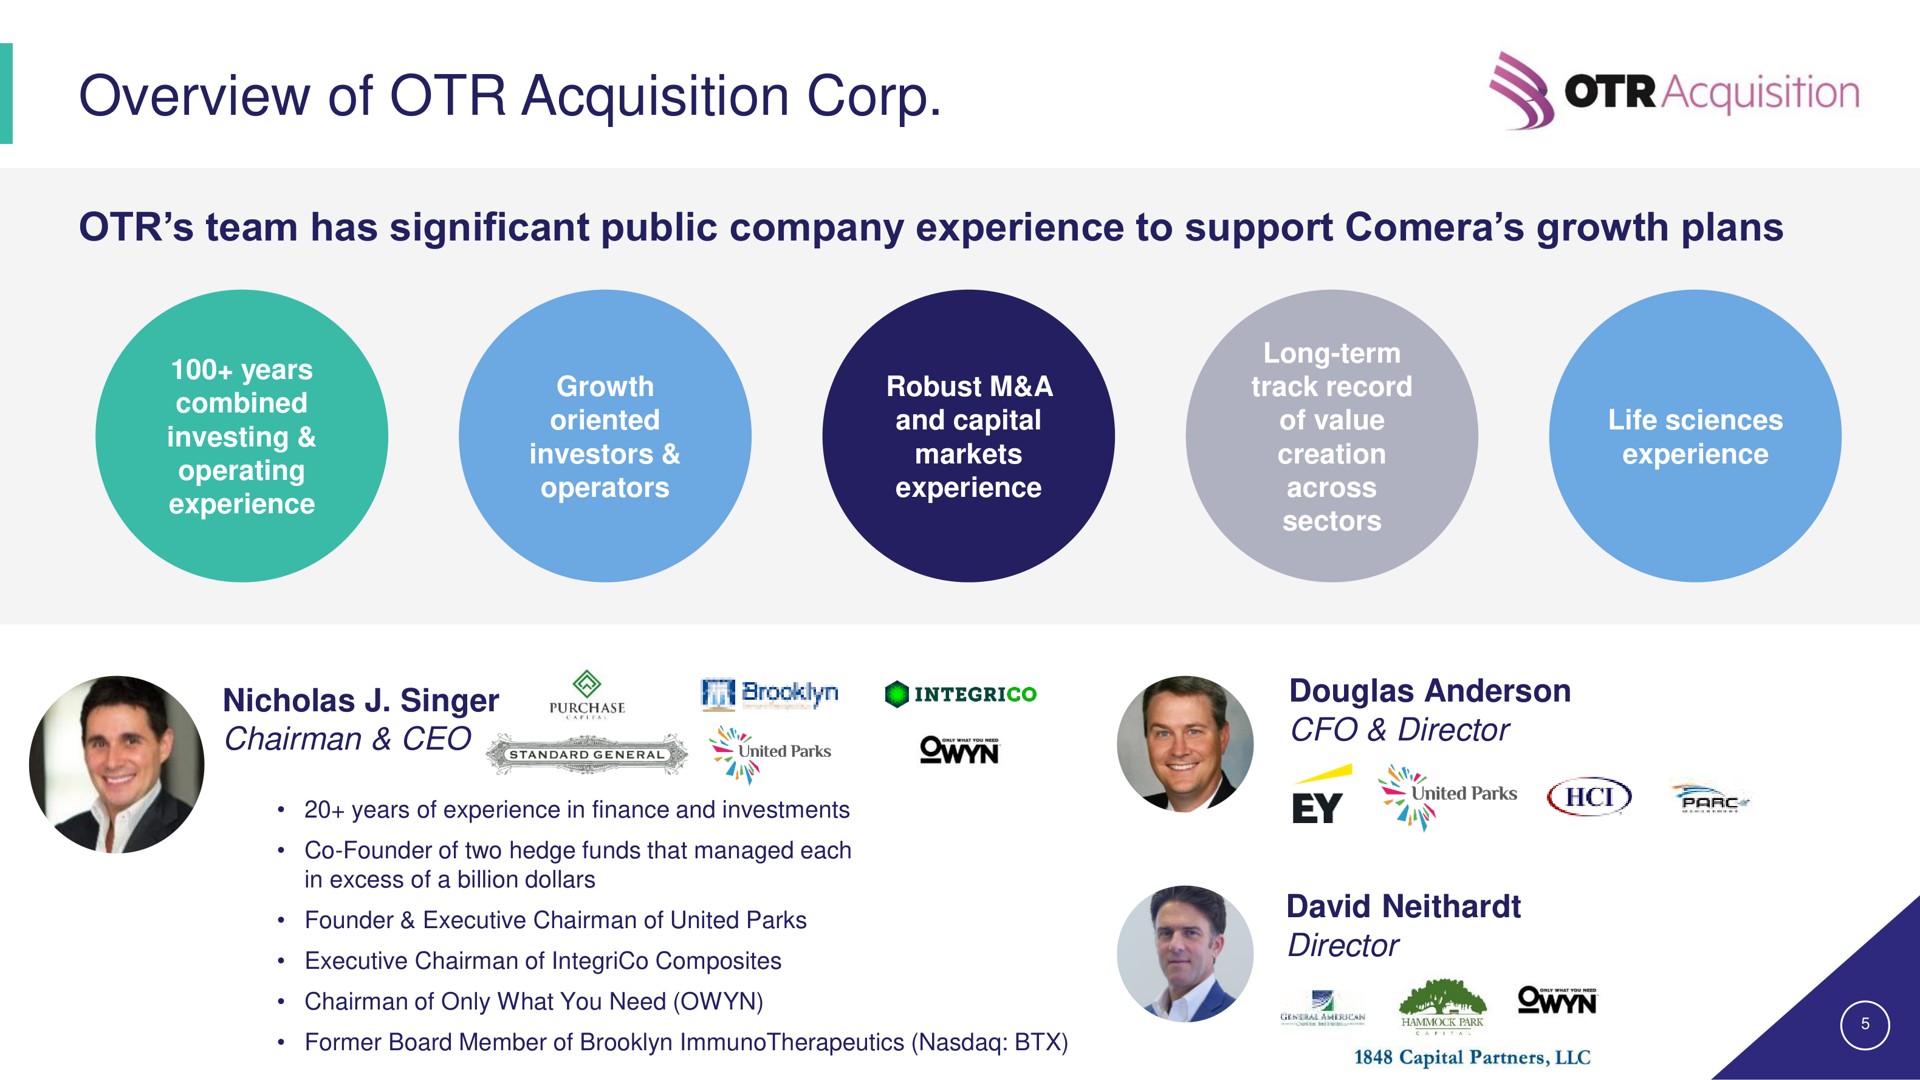 overview of acquisition corp | Comera